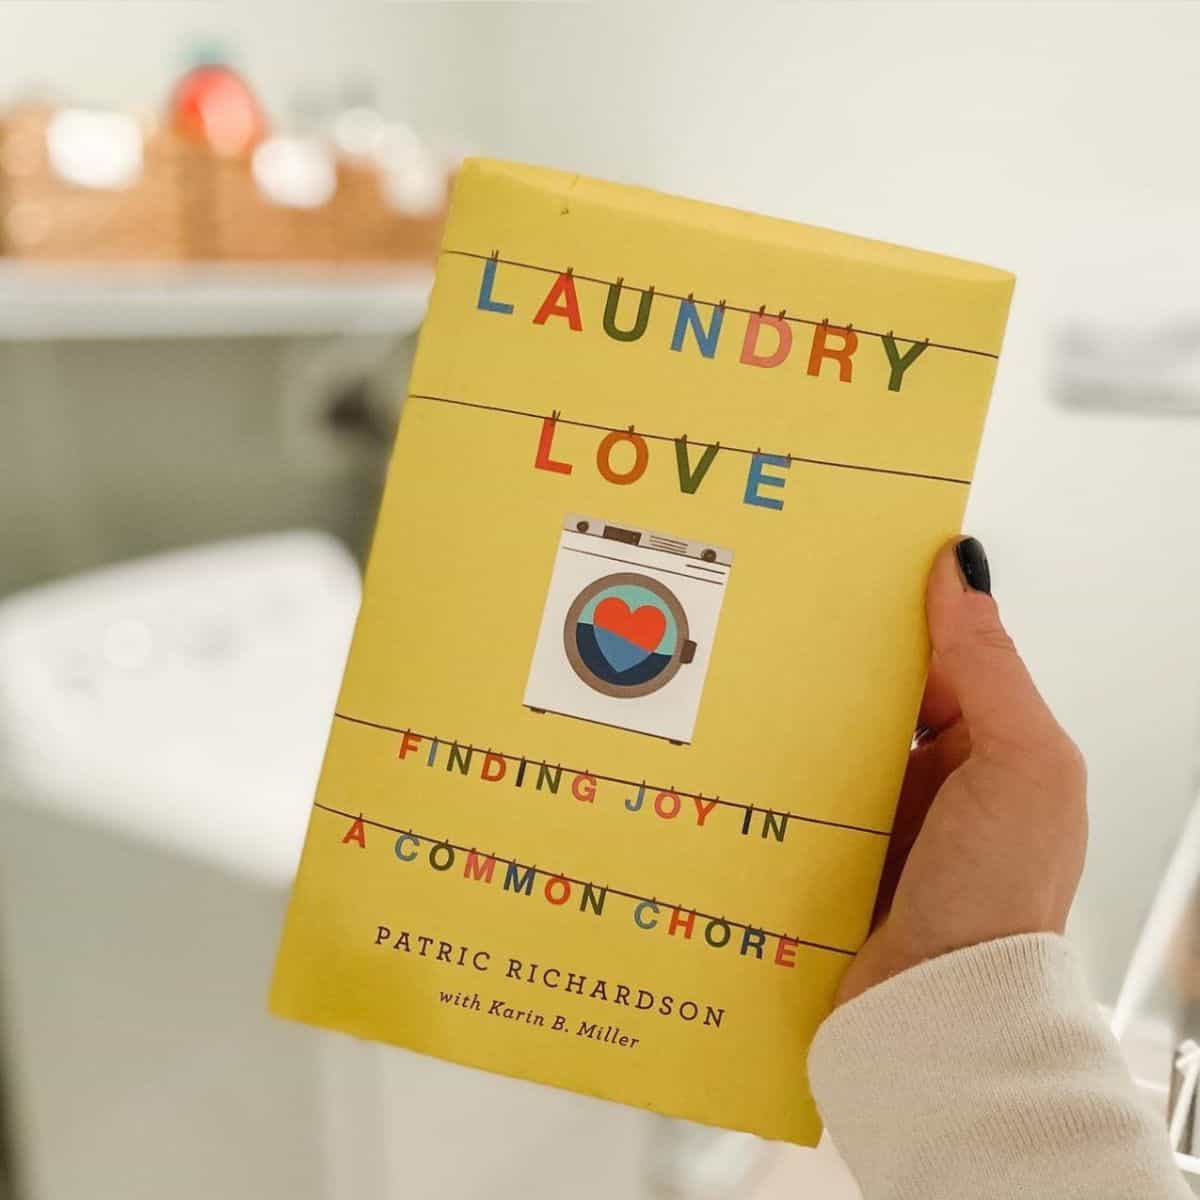 Review: “Laundry Love” Tips from Patric Richardson’s Book